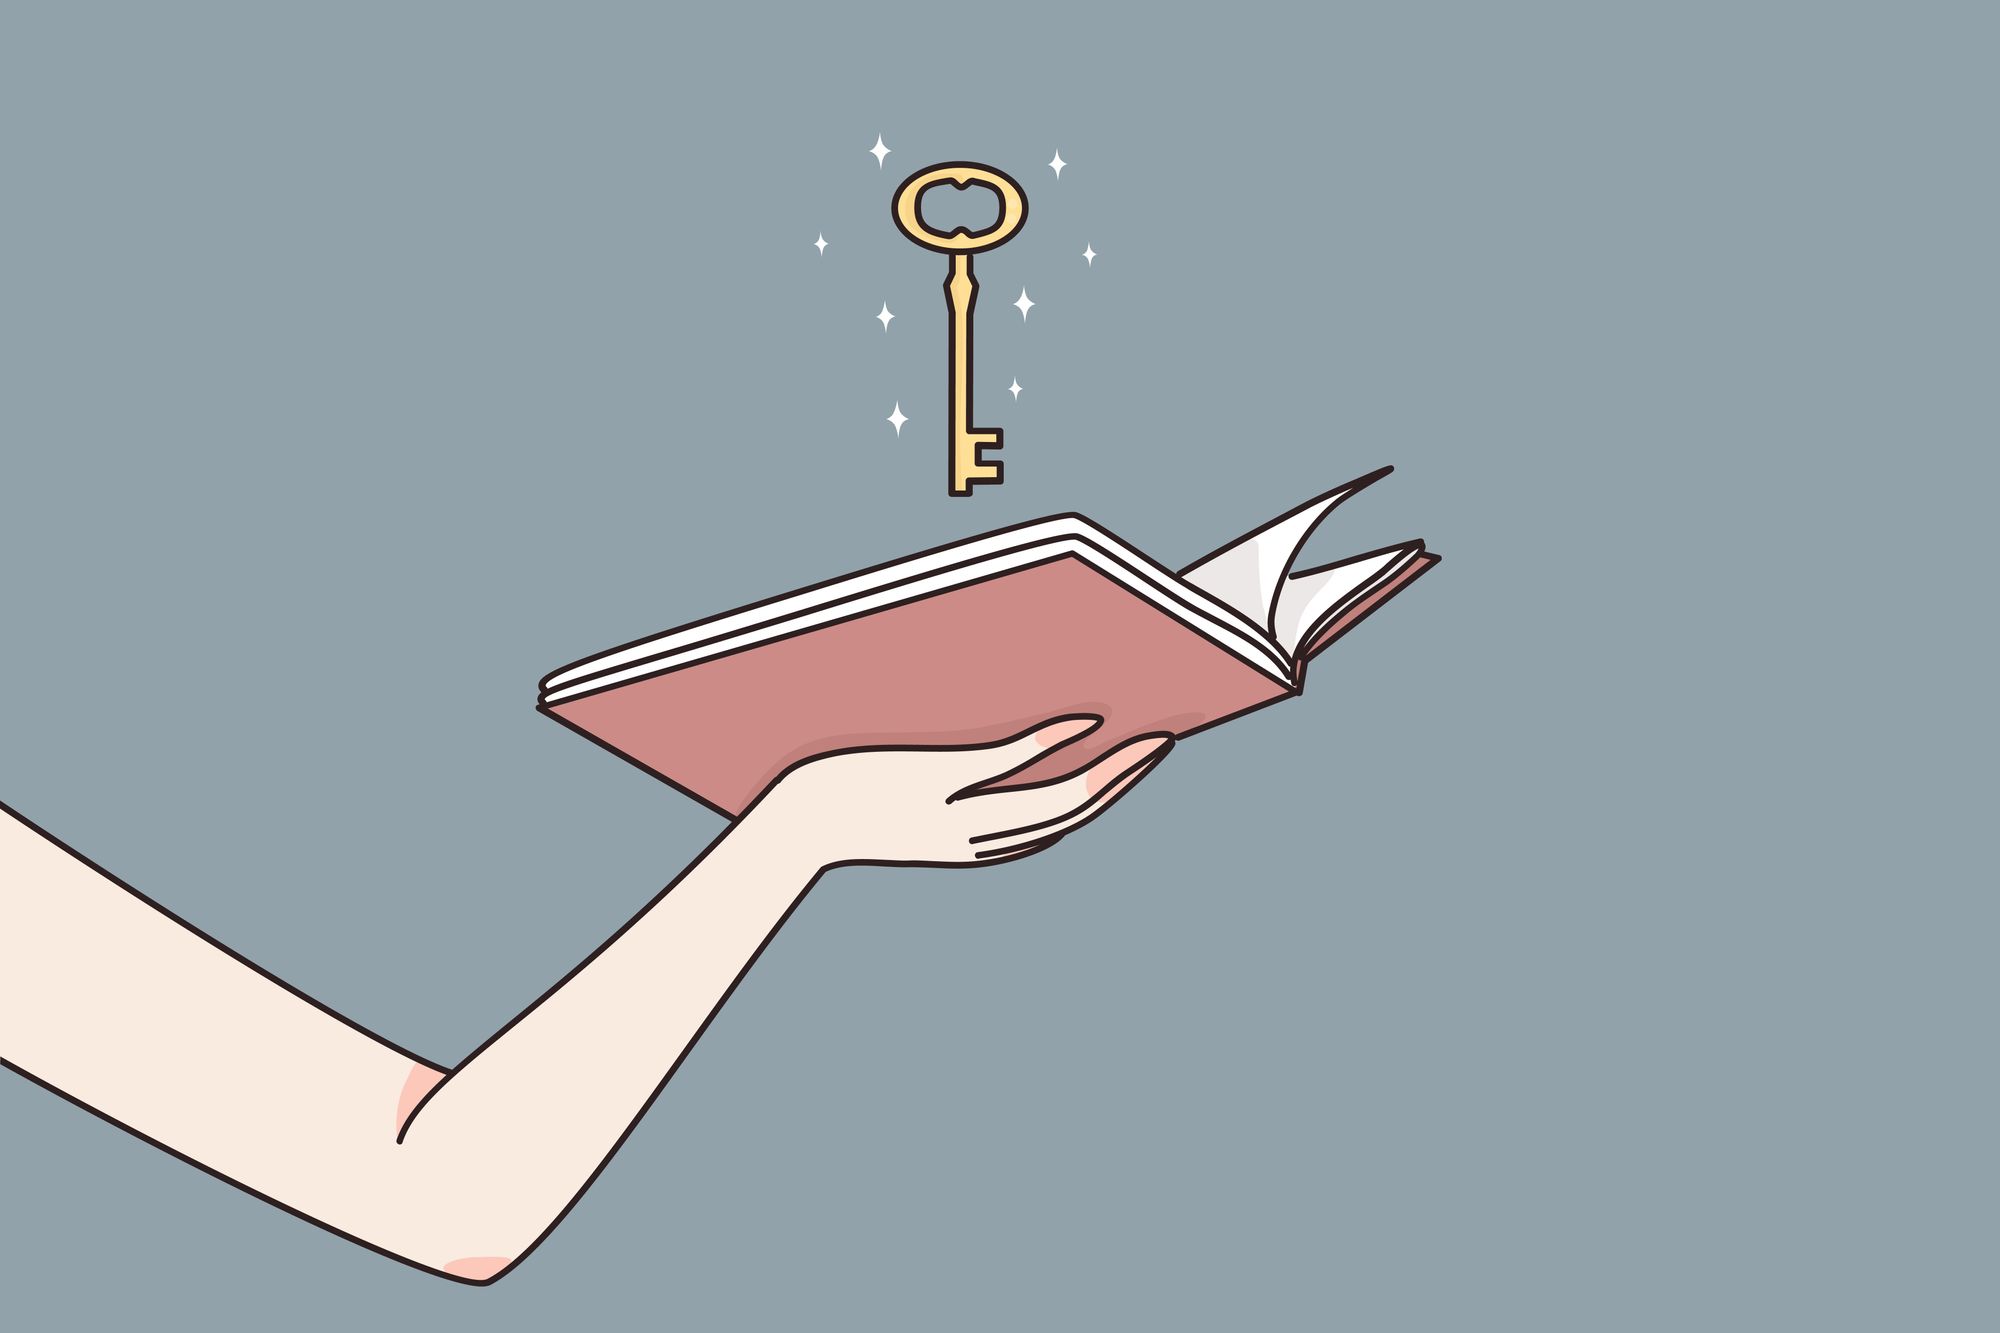 Illustration of an outstretched arm with an open book resting on the hand, and a key floating magically above it.